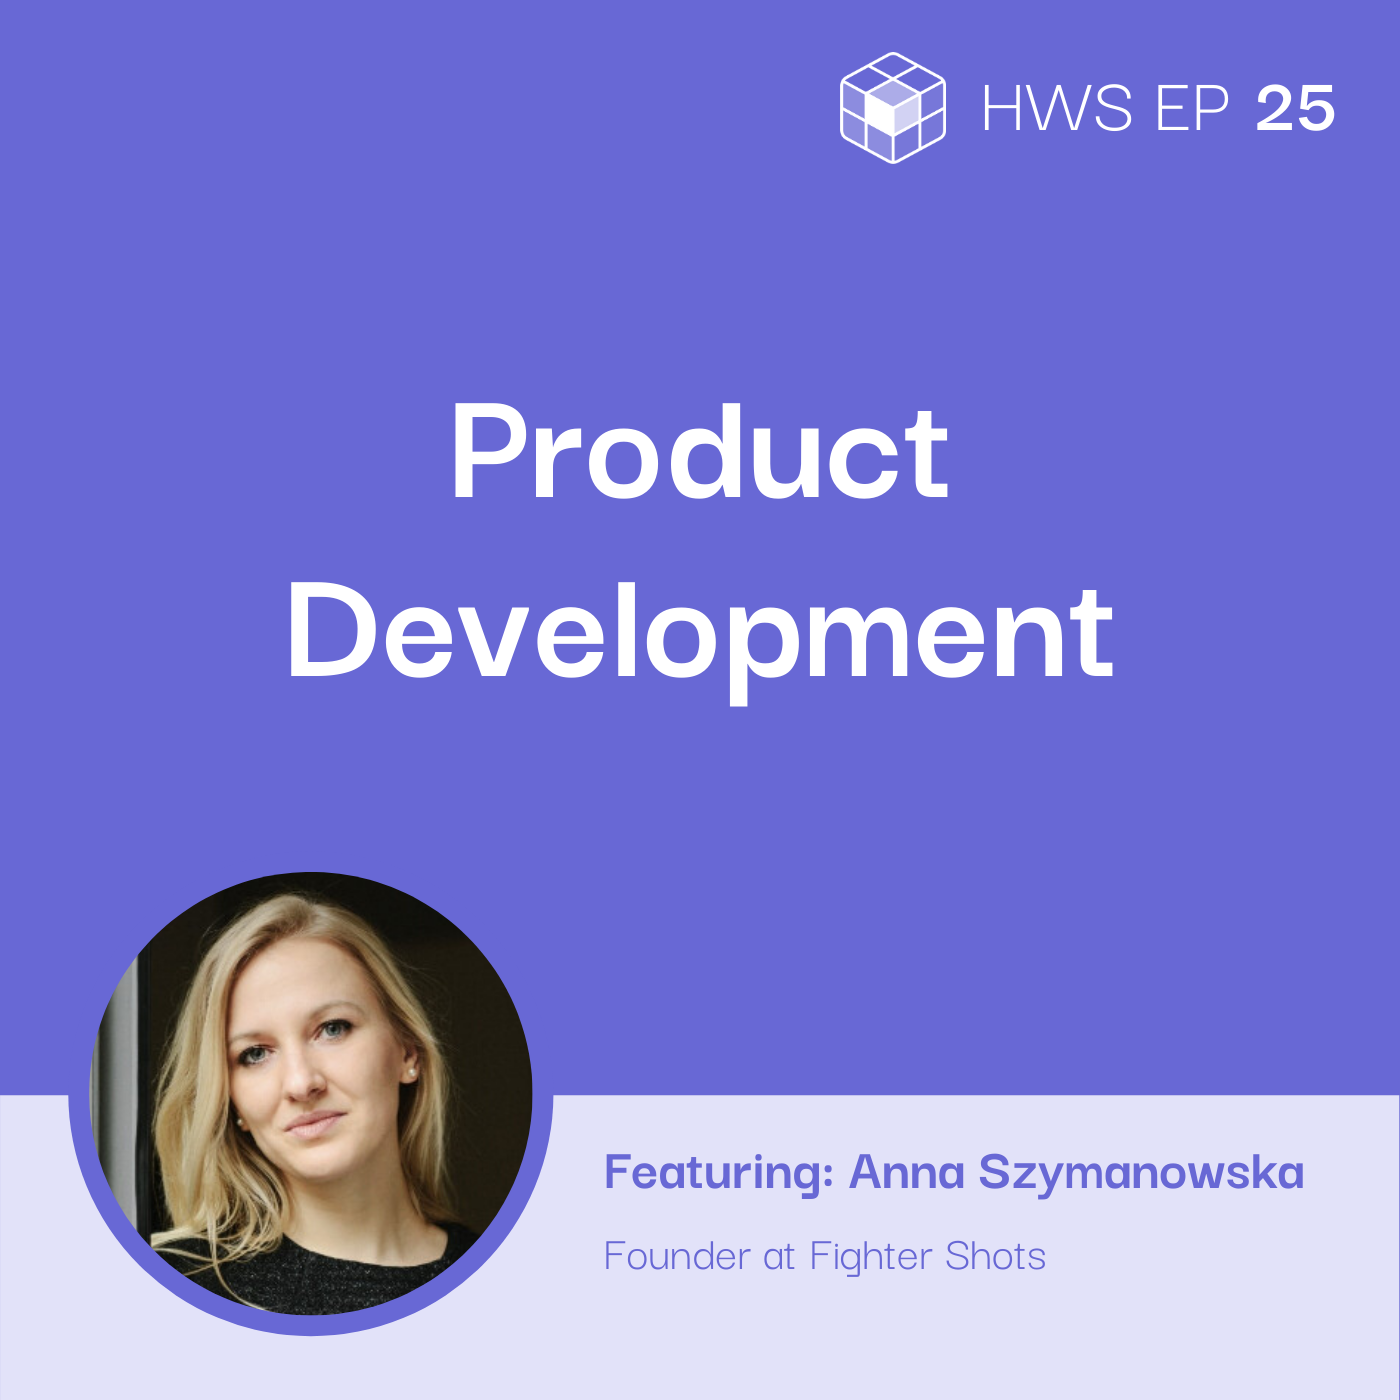 Anna Szymanowska shares her story and the story of Fighter Shots, to help entrepreneurs break into the food-based product business